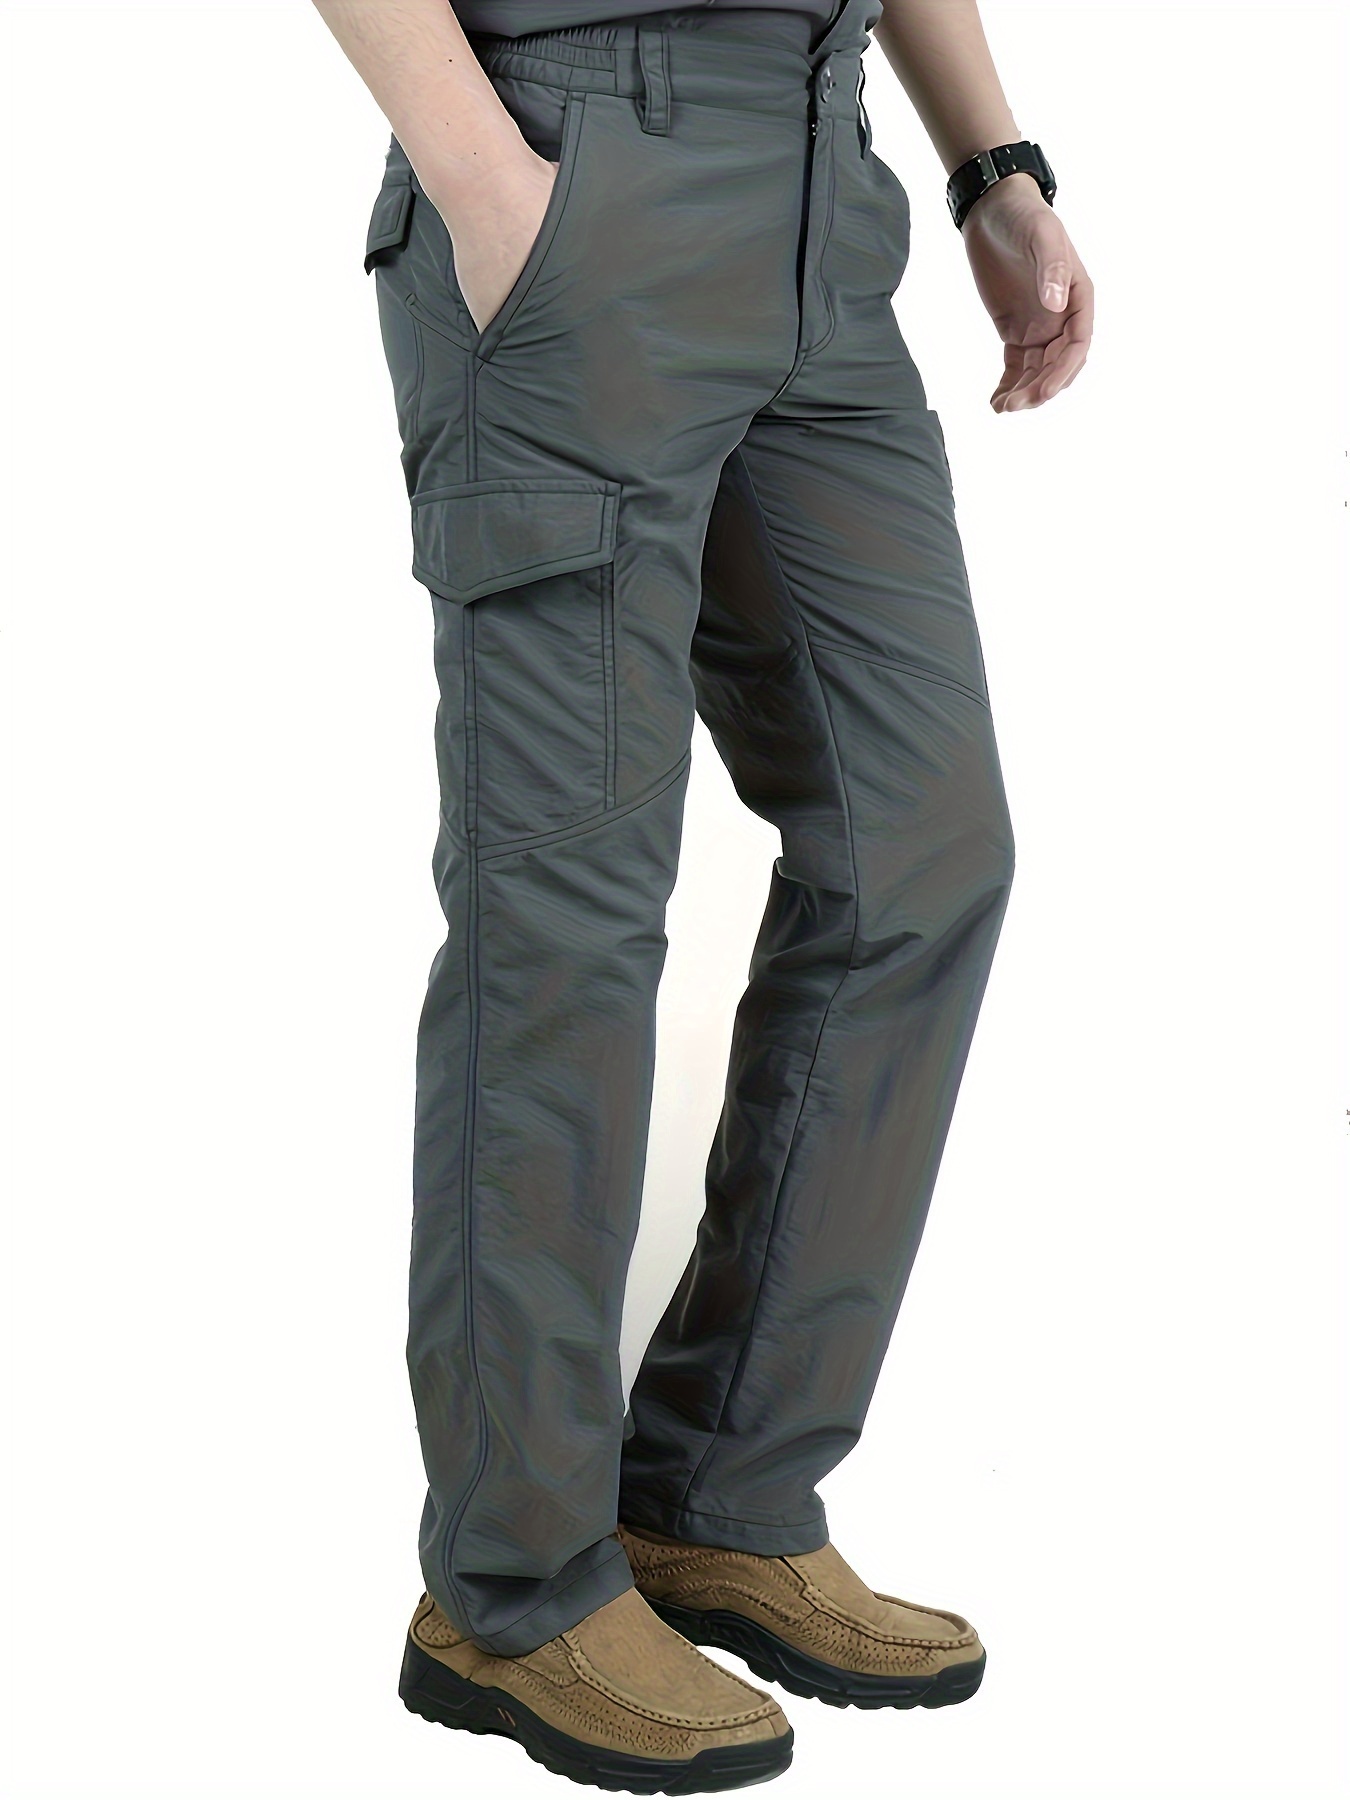 Summer Pants Waterproof Height Quality Quick Dry Trousers for Men